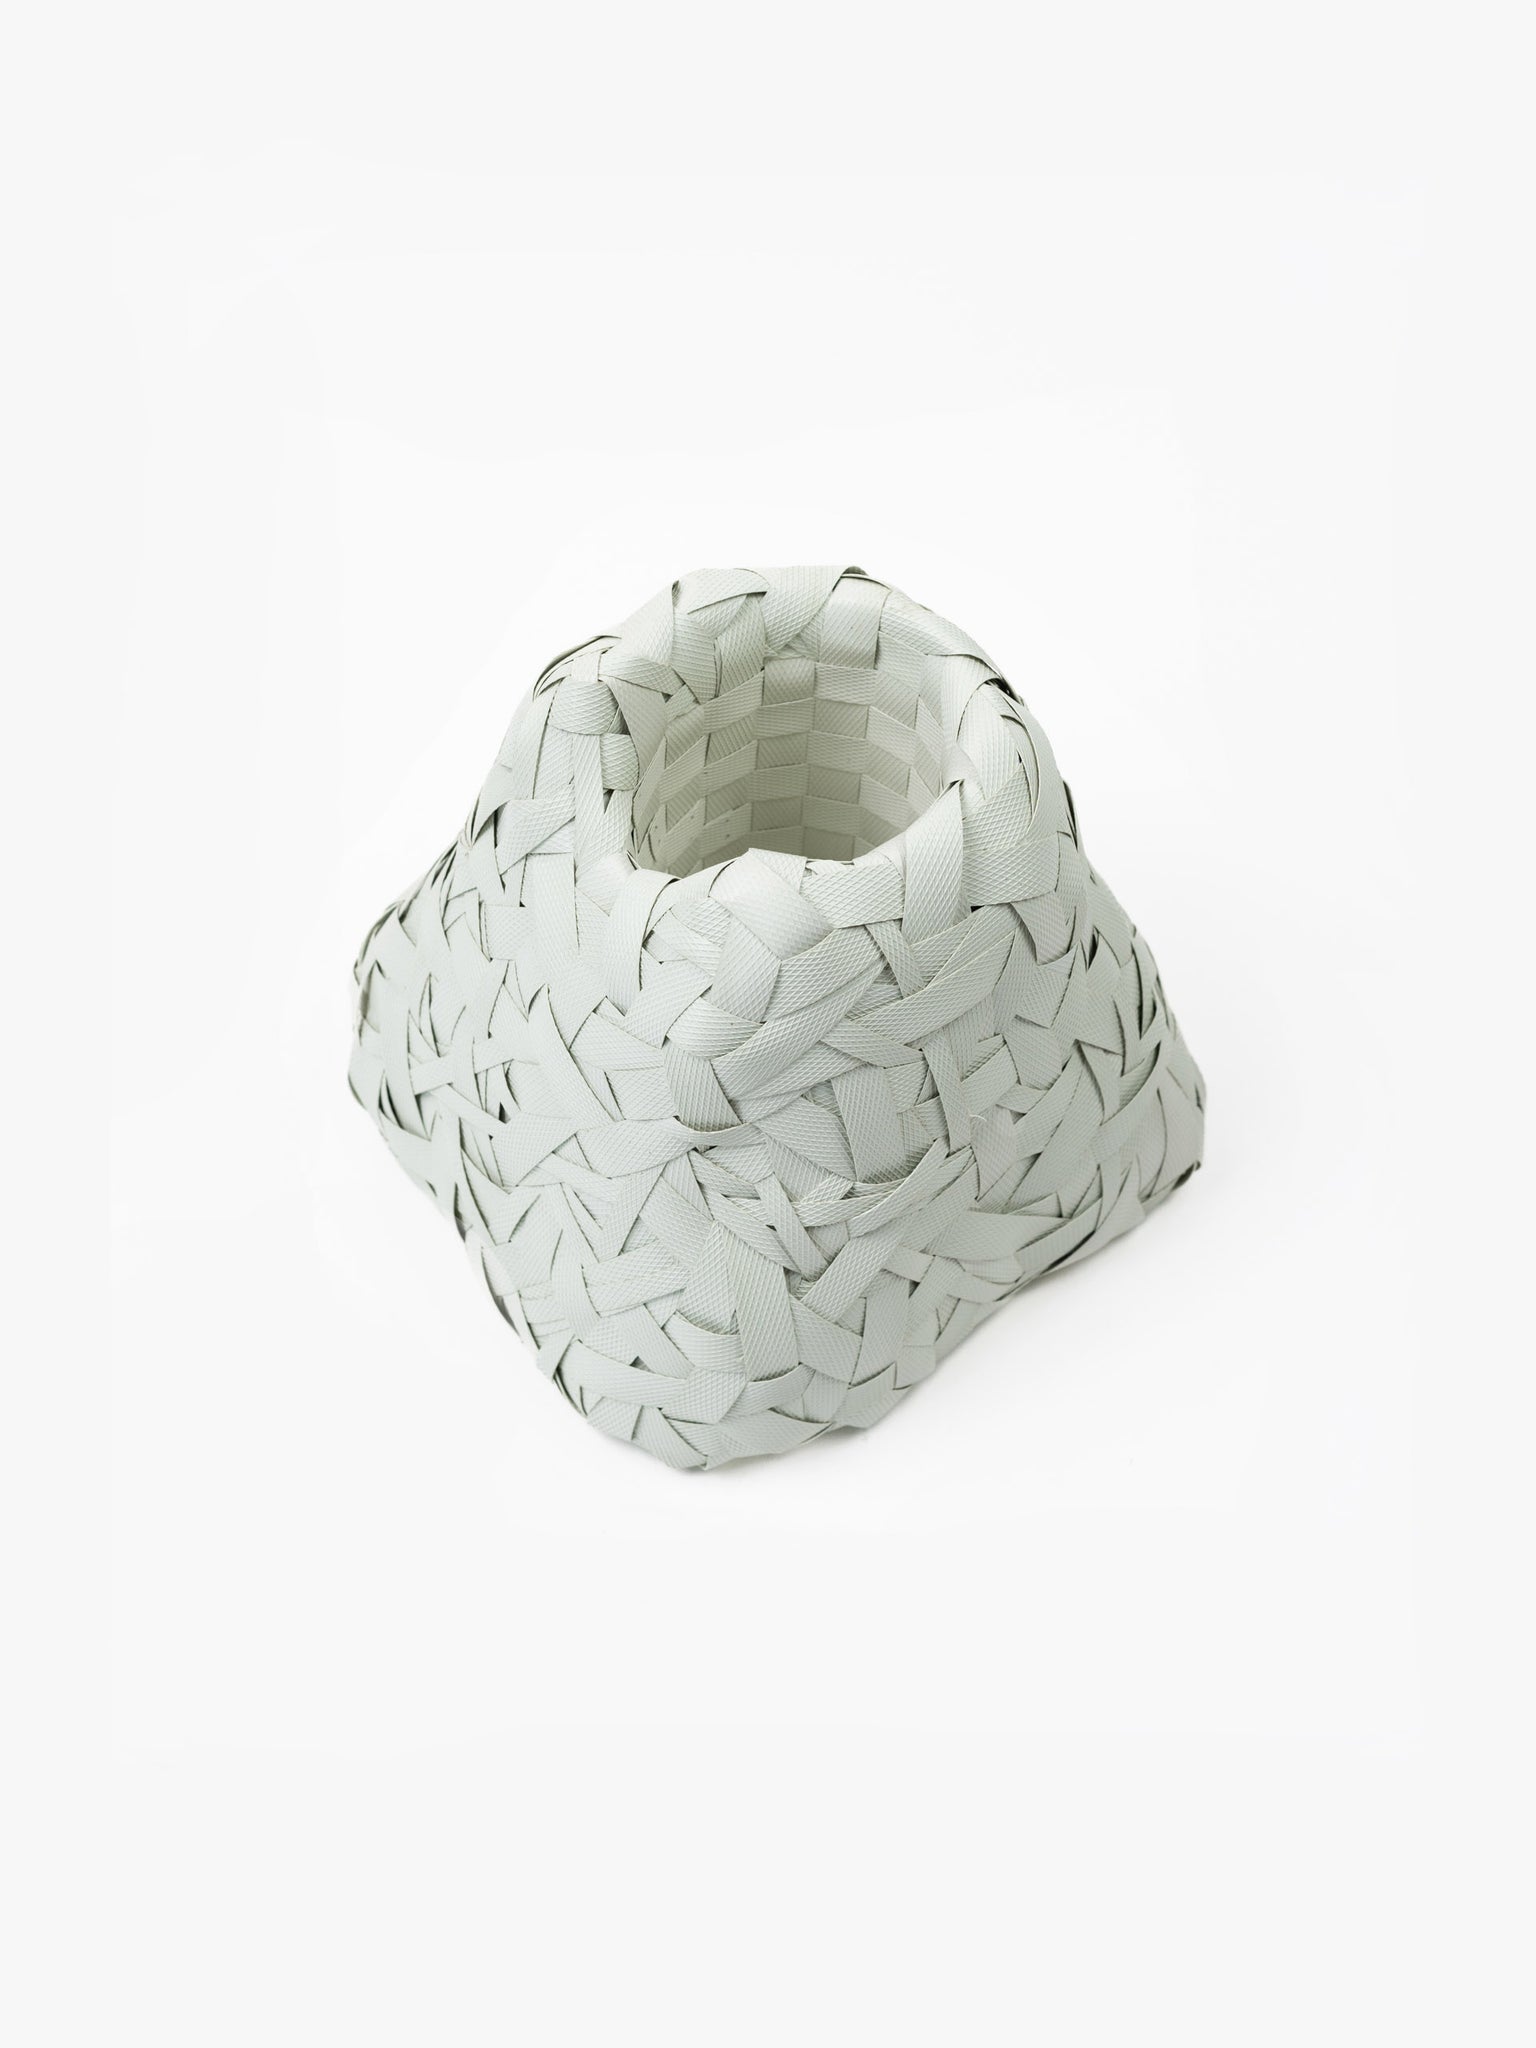 Recycled Plastic Woven Ecology Vase White